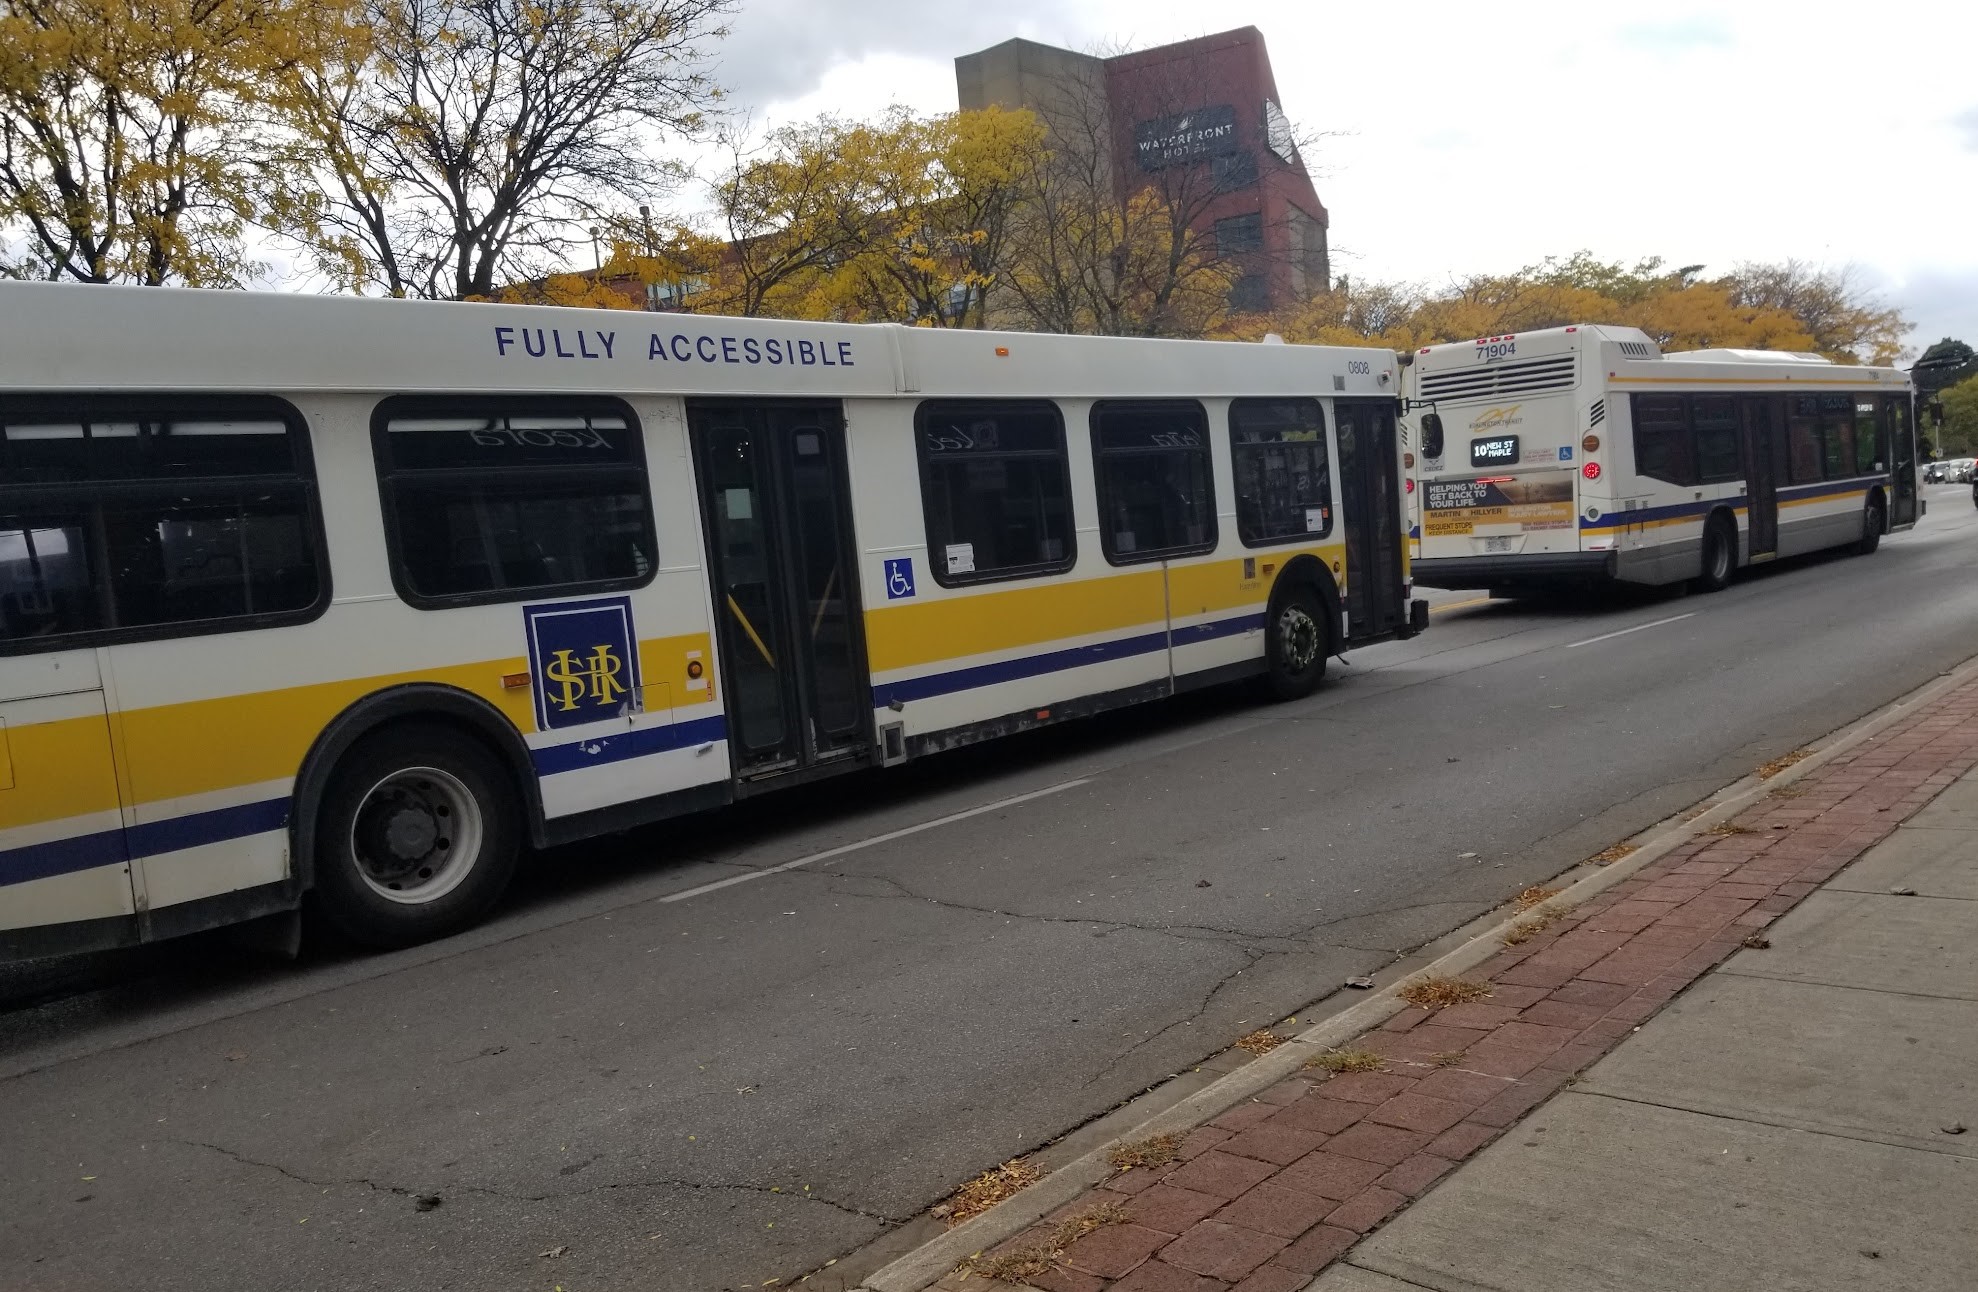 Two Burlington Transit buses driving one in front of the other along the road in downtown Burlington.